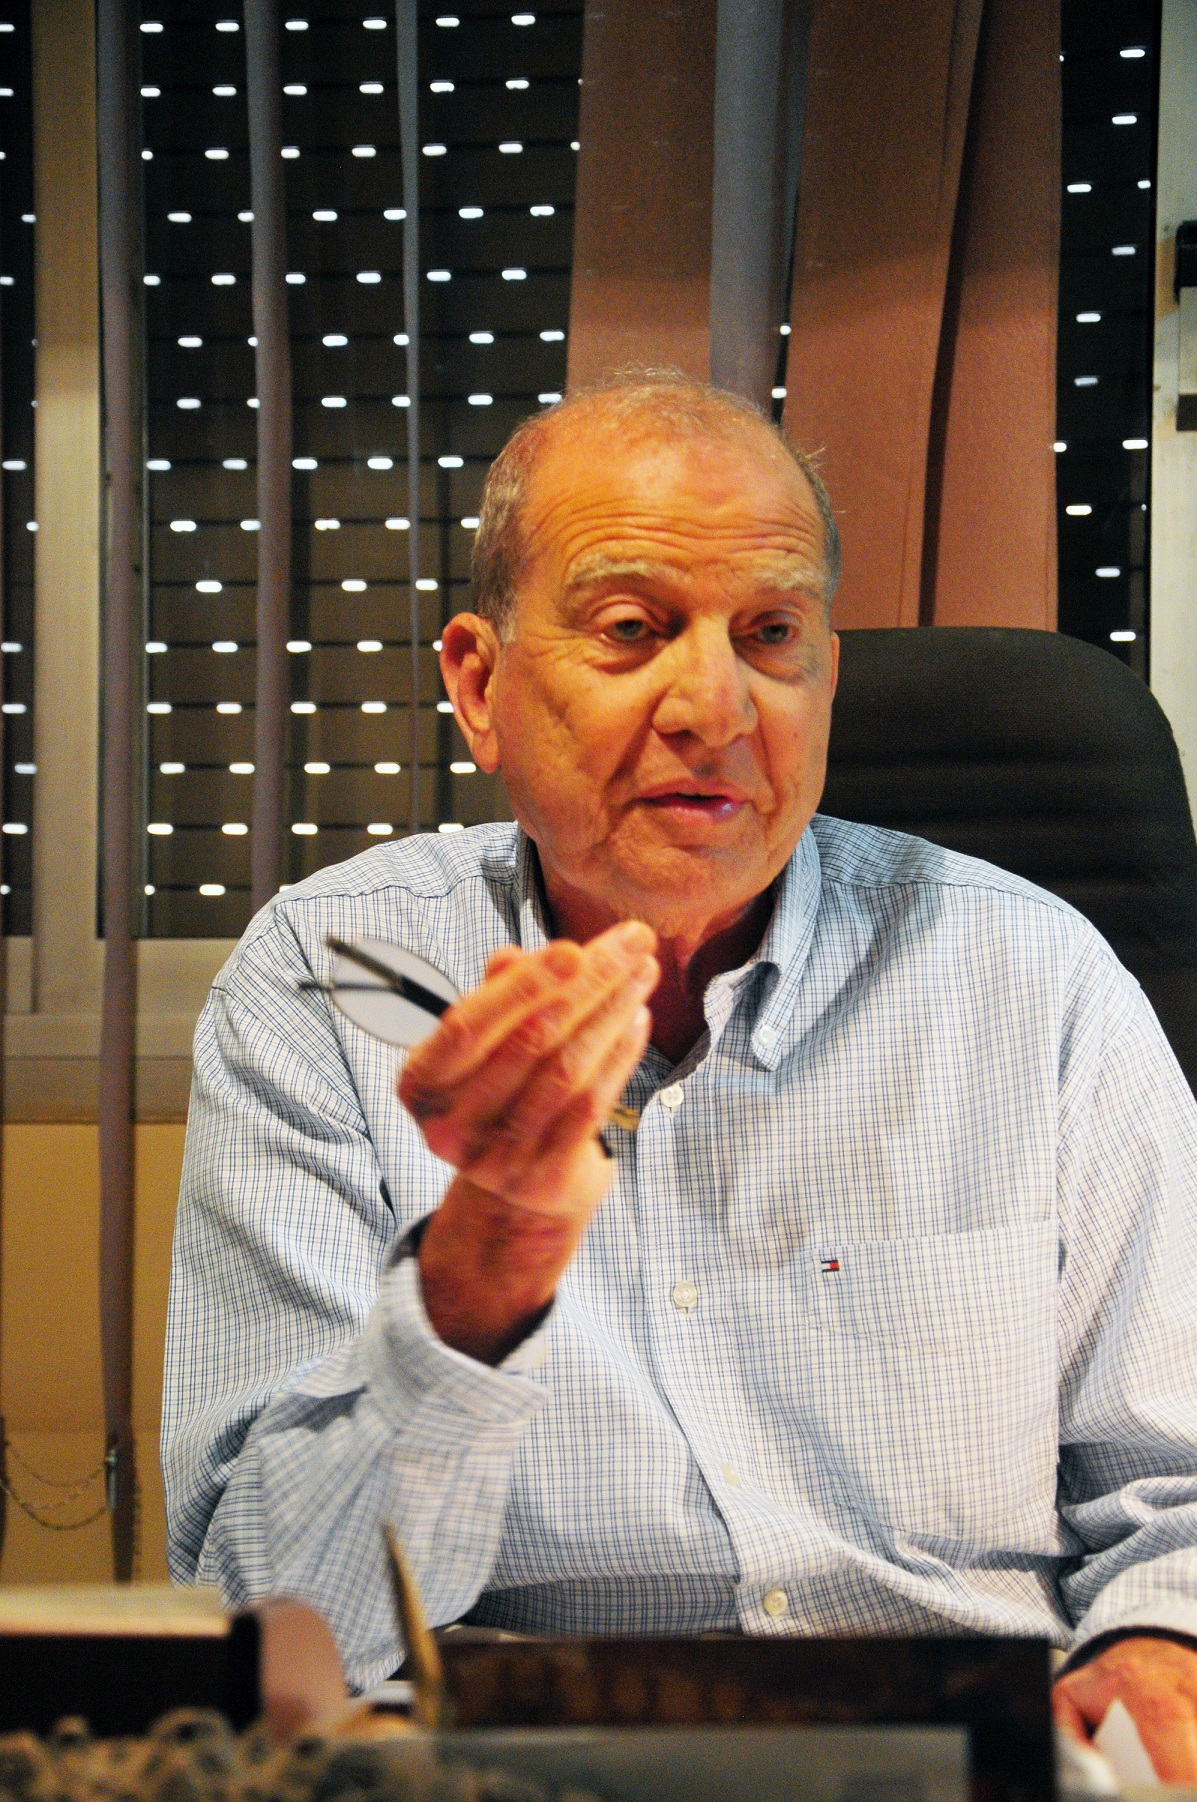 Head of the Egyptian Social Democratic Party, Mohamed Aboul-Ghar (Photo by Hassan Ibrahim)